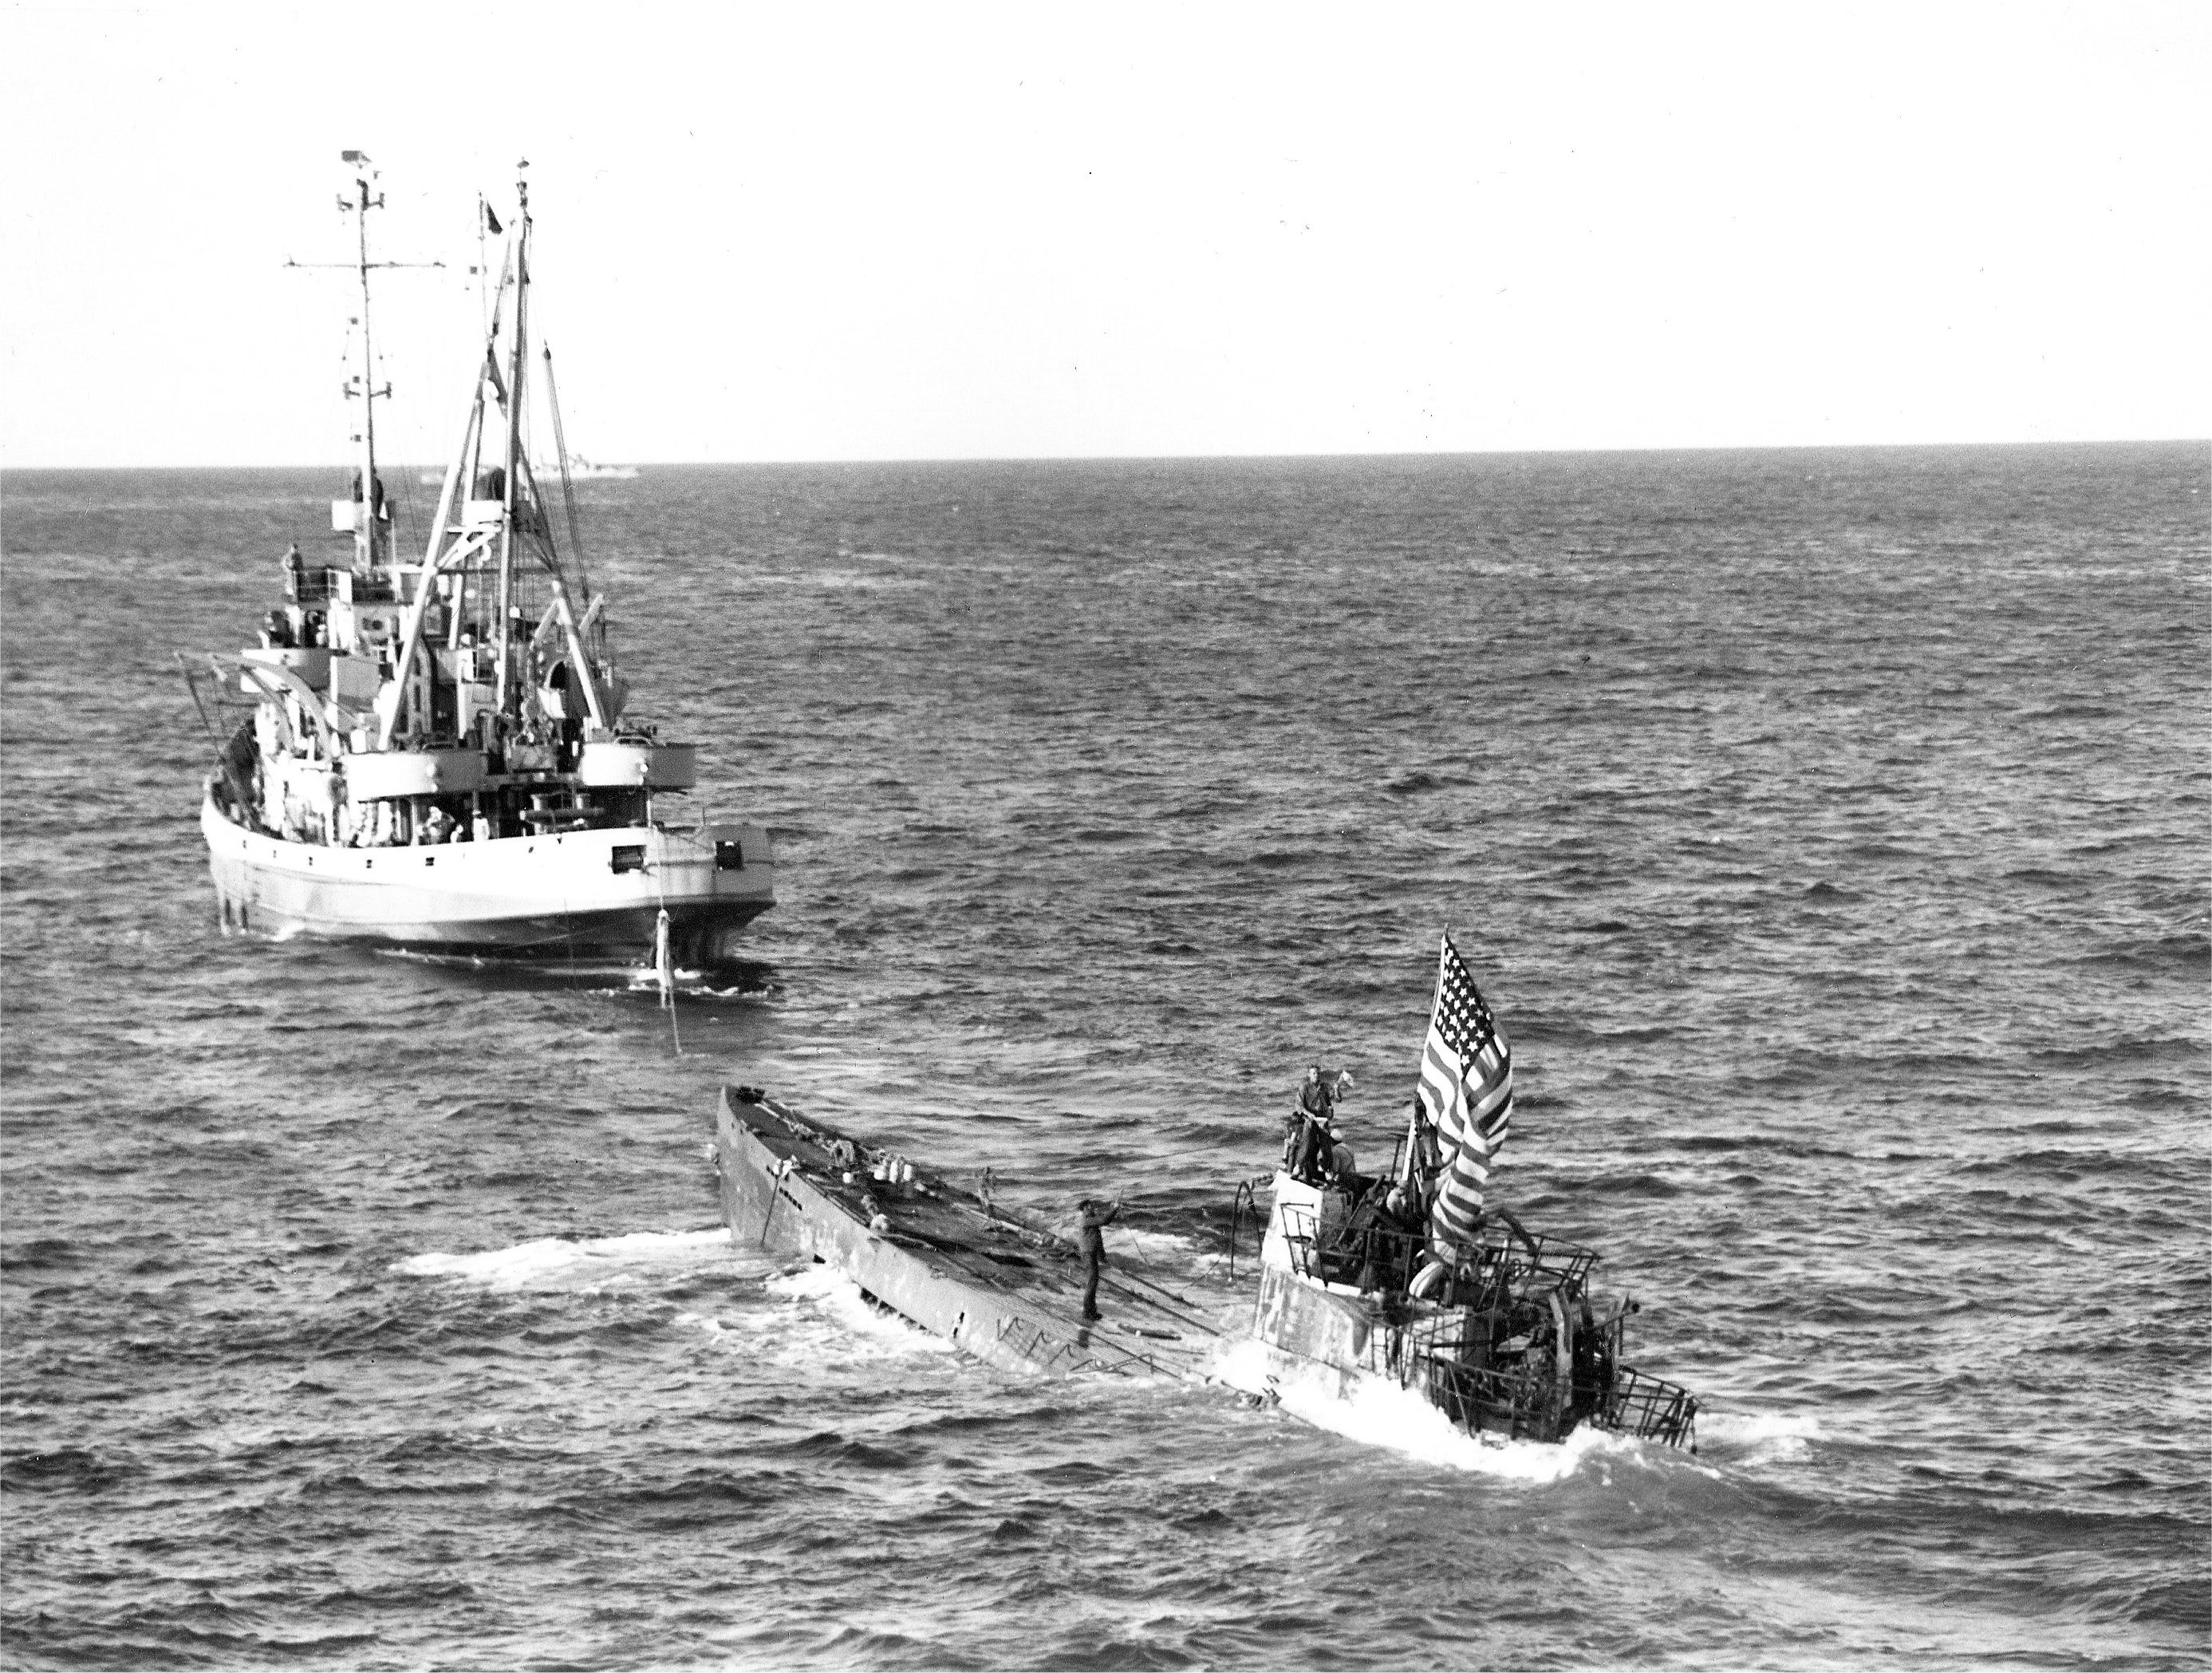 Oceangoing tug USS Abnaki takes the captured Type IXC submarine U-505 under tow, 7 Jun 1944. U-505 was captured three days earlier by the USS Guadalcanal hunter group. Photo 1 of 3.